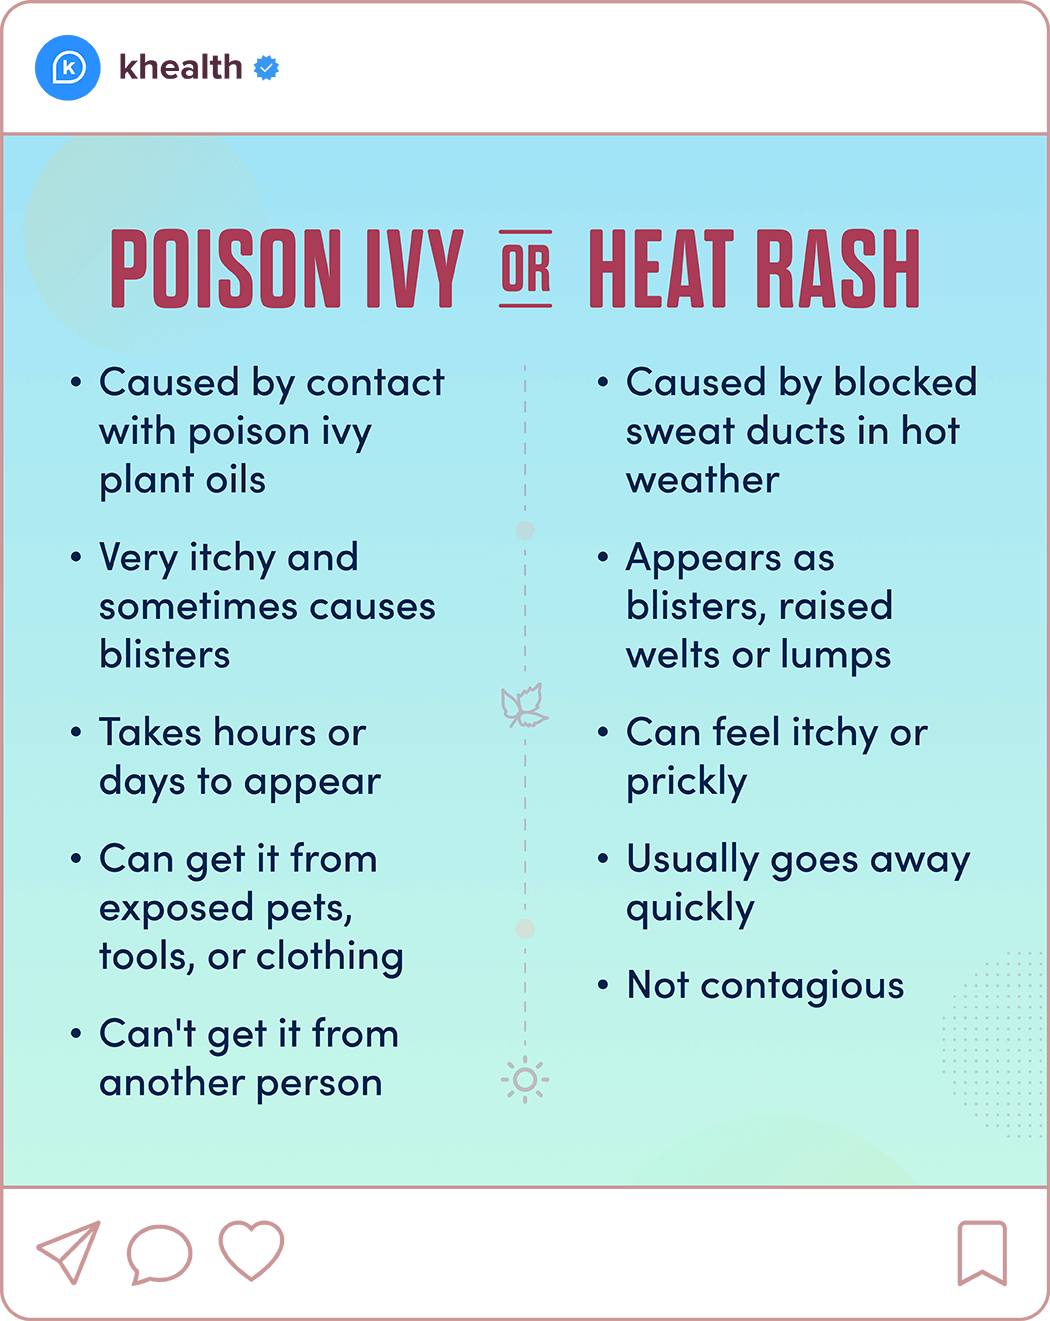 Instagram post listing the differences between poison ivy and heat rash